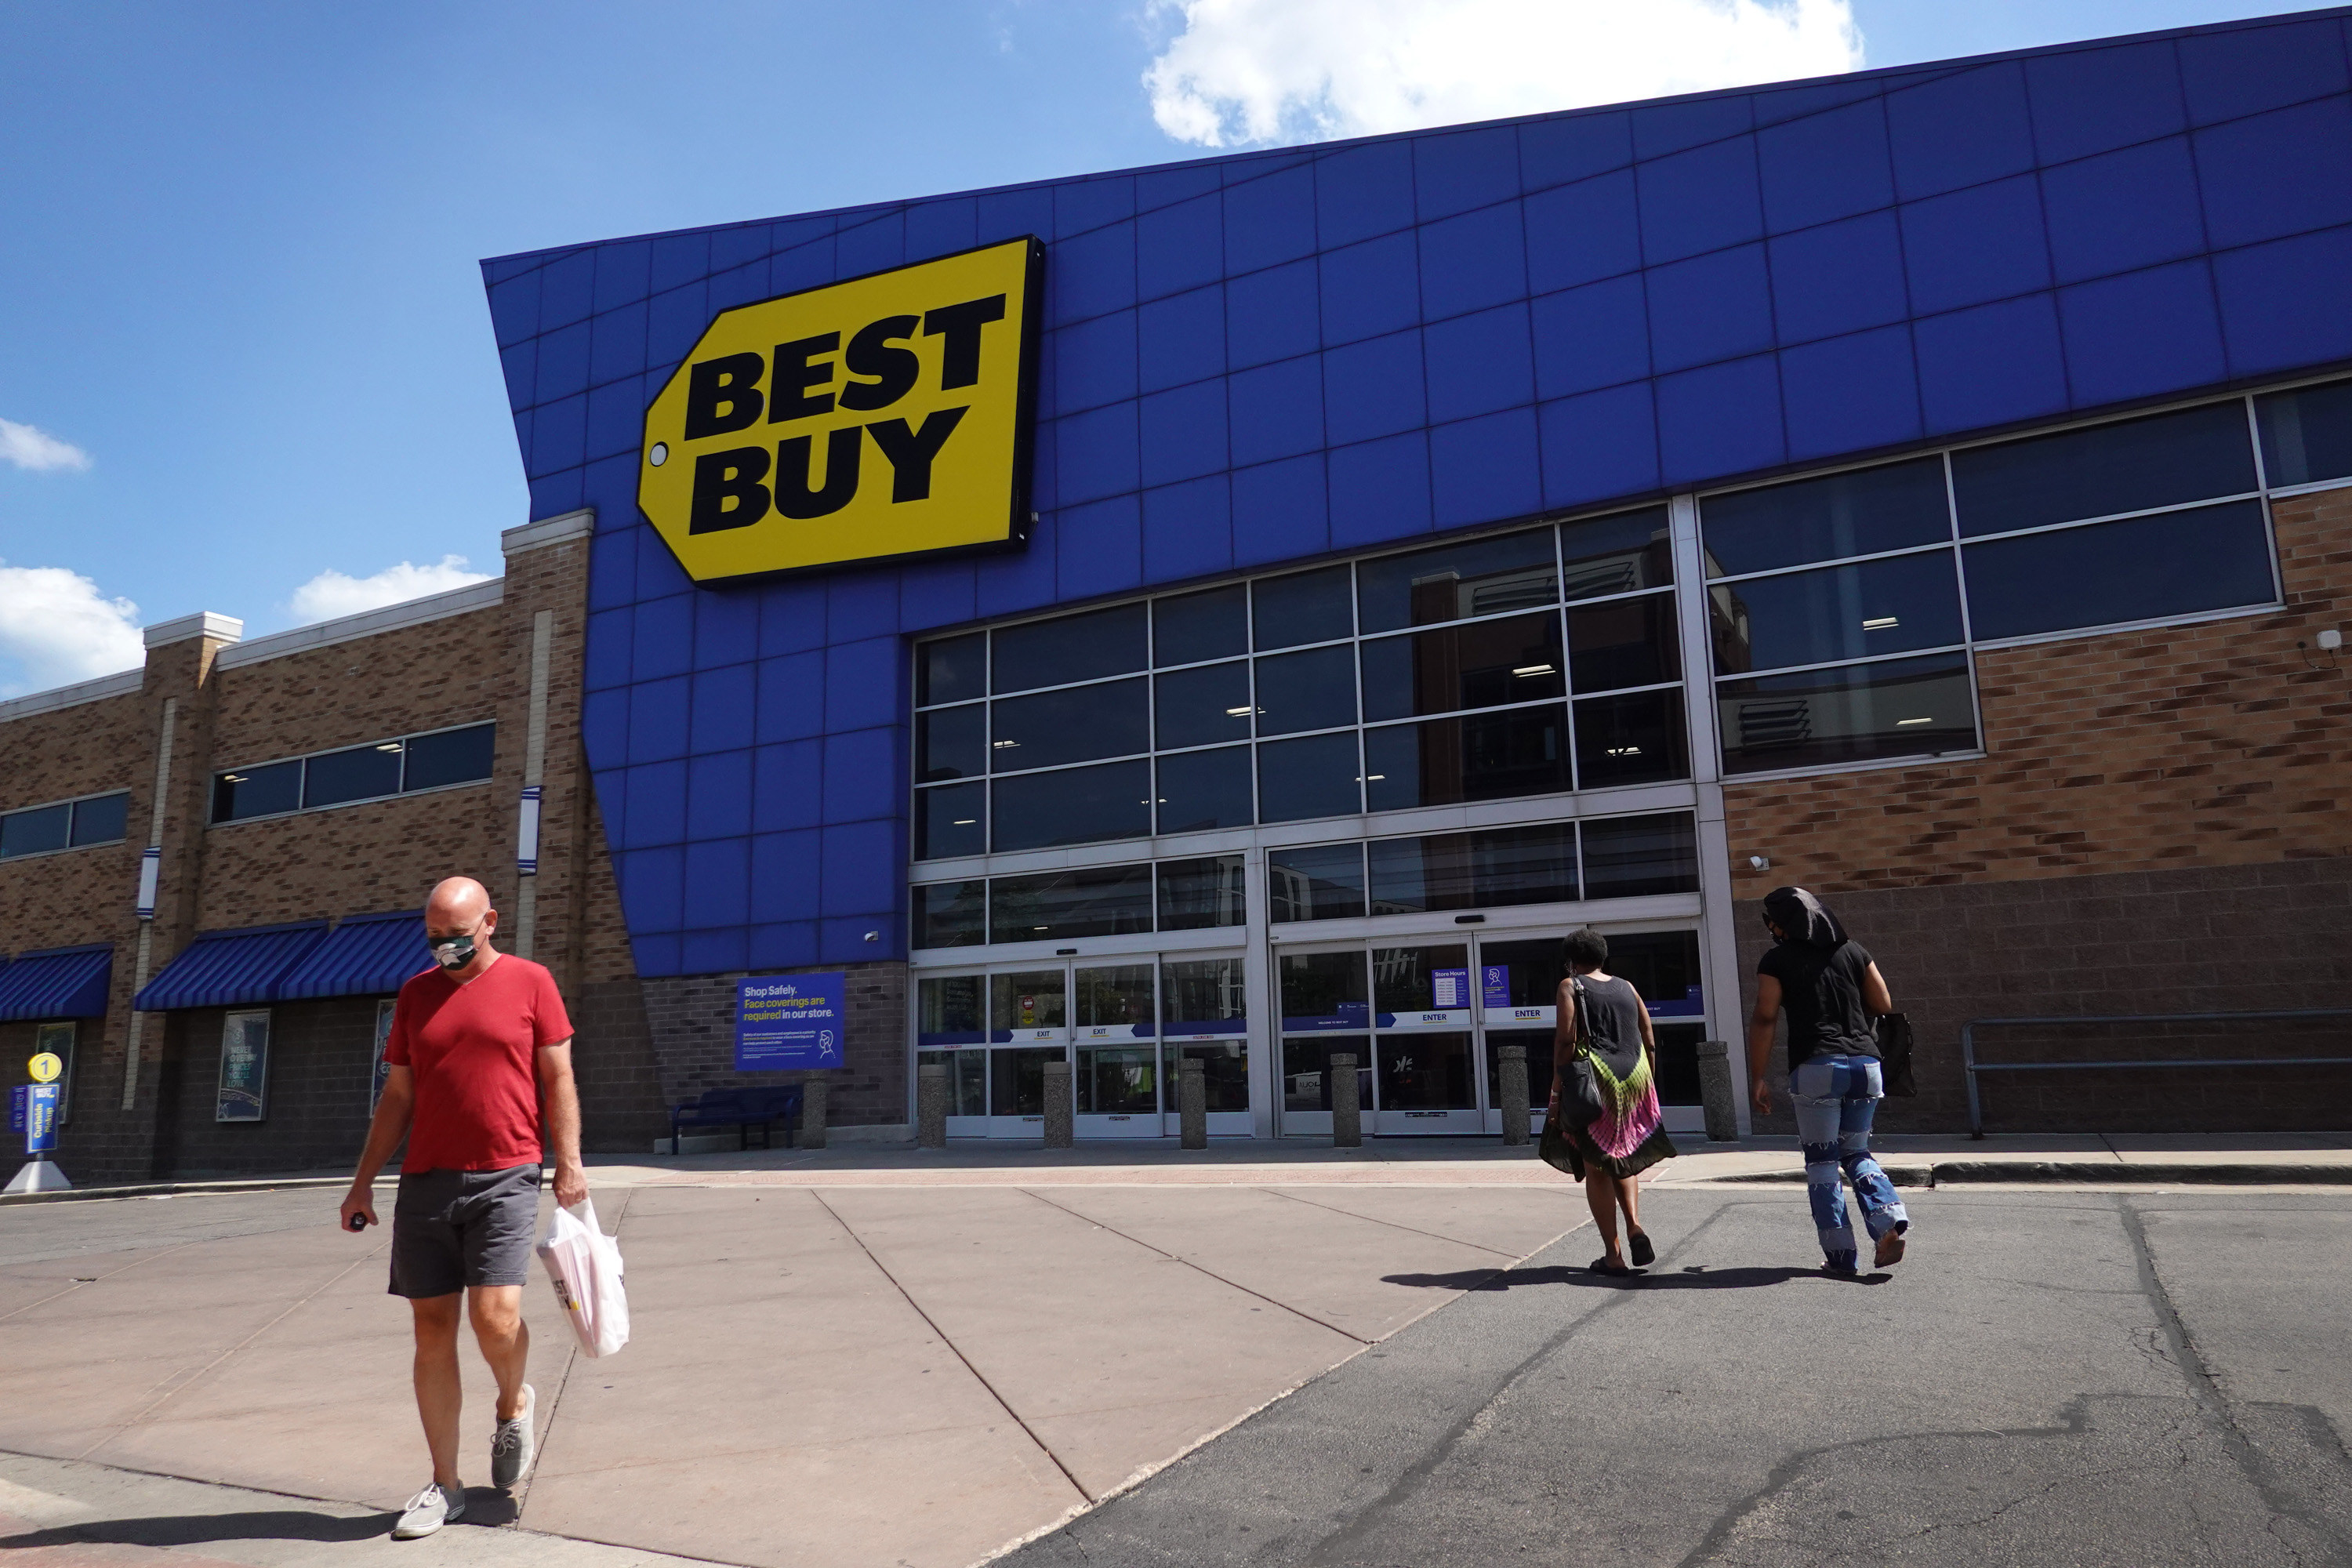 The exterior of a Best Buy store